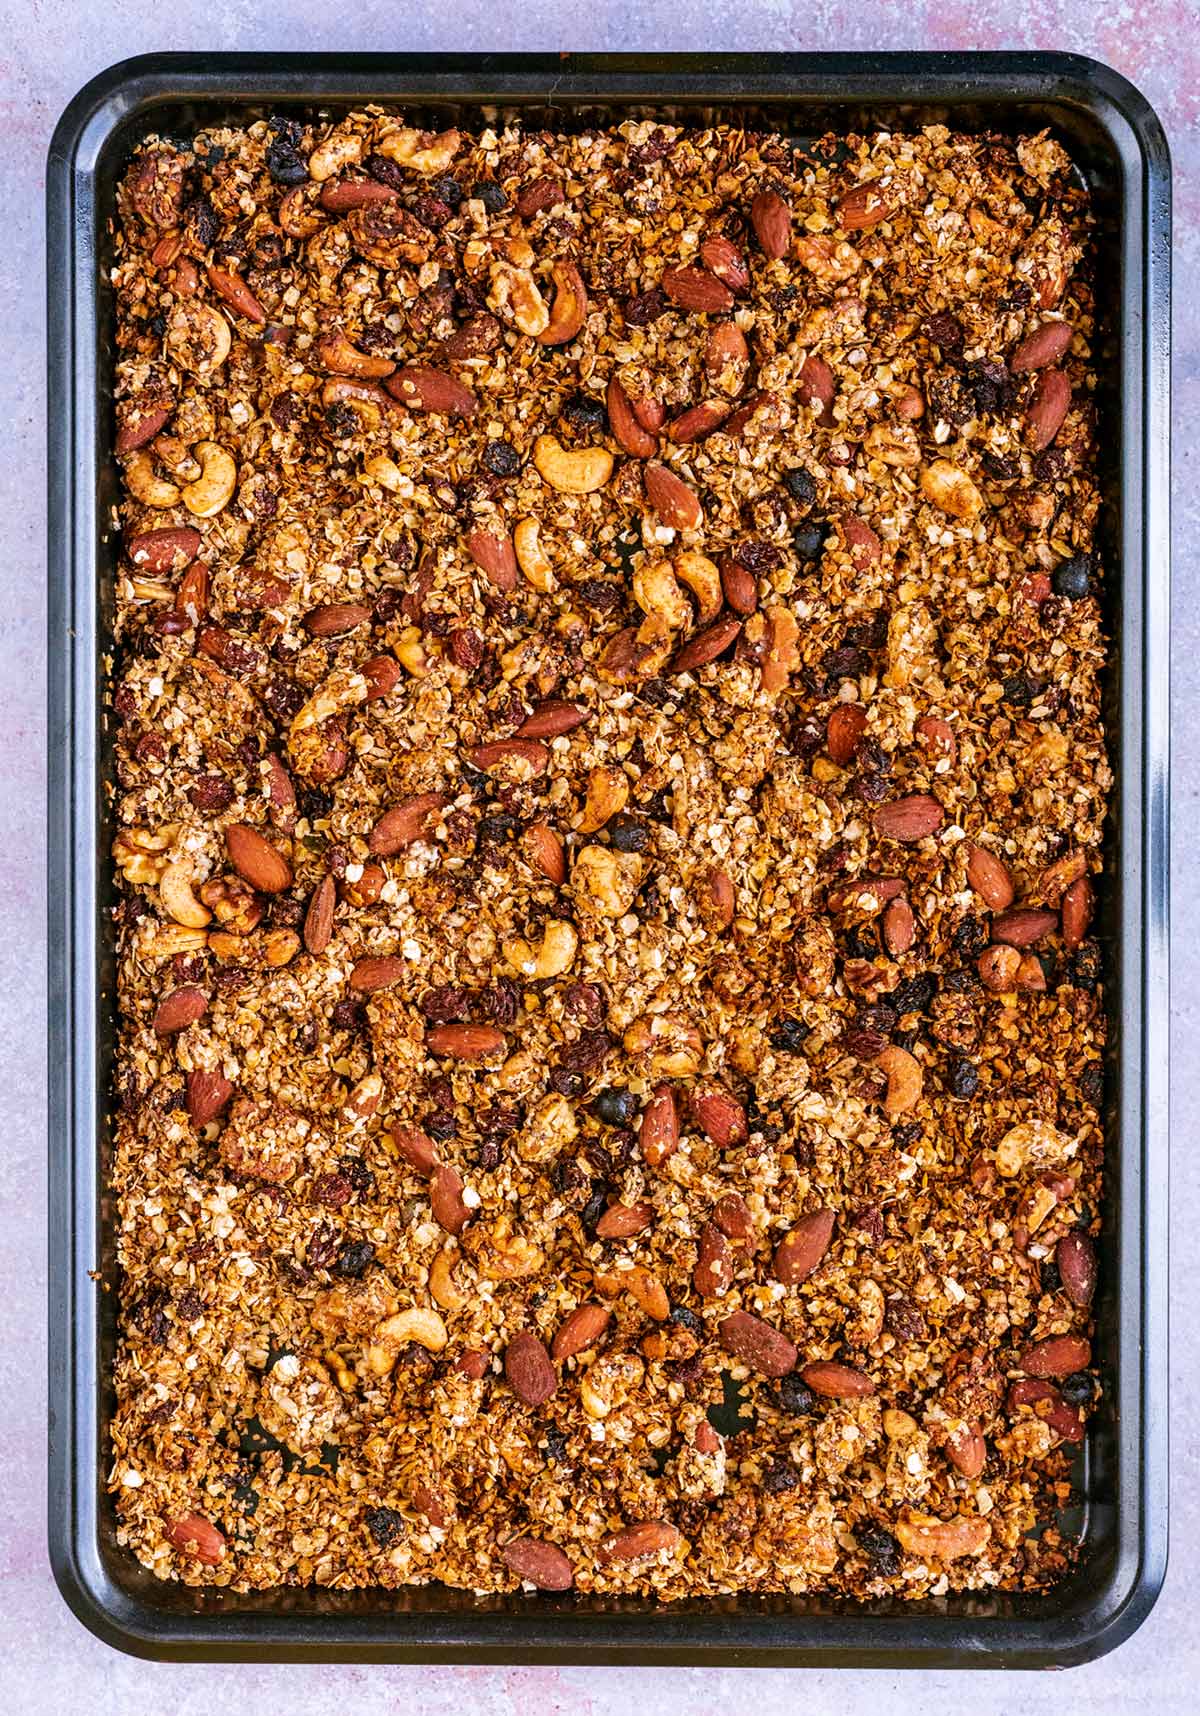 Cooked granola on a baking tray.